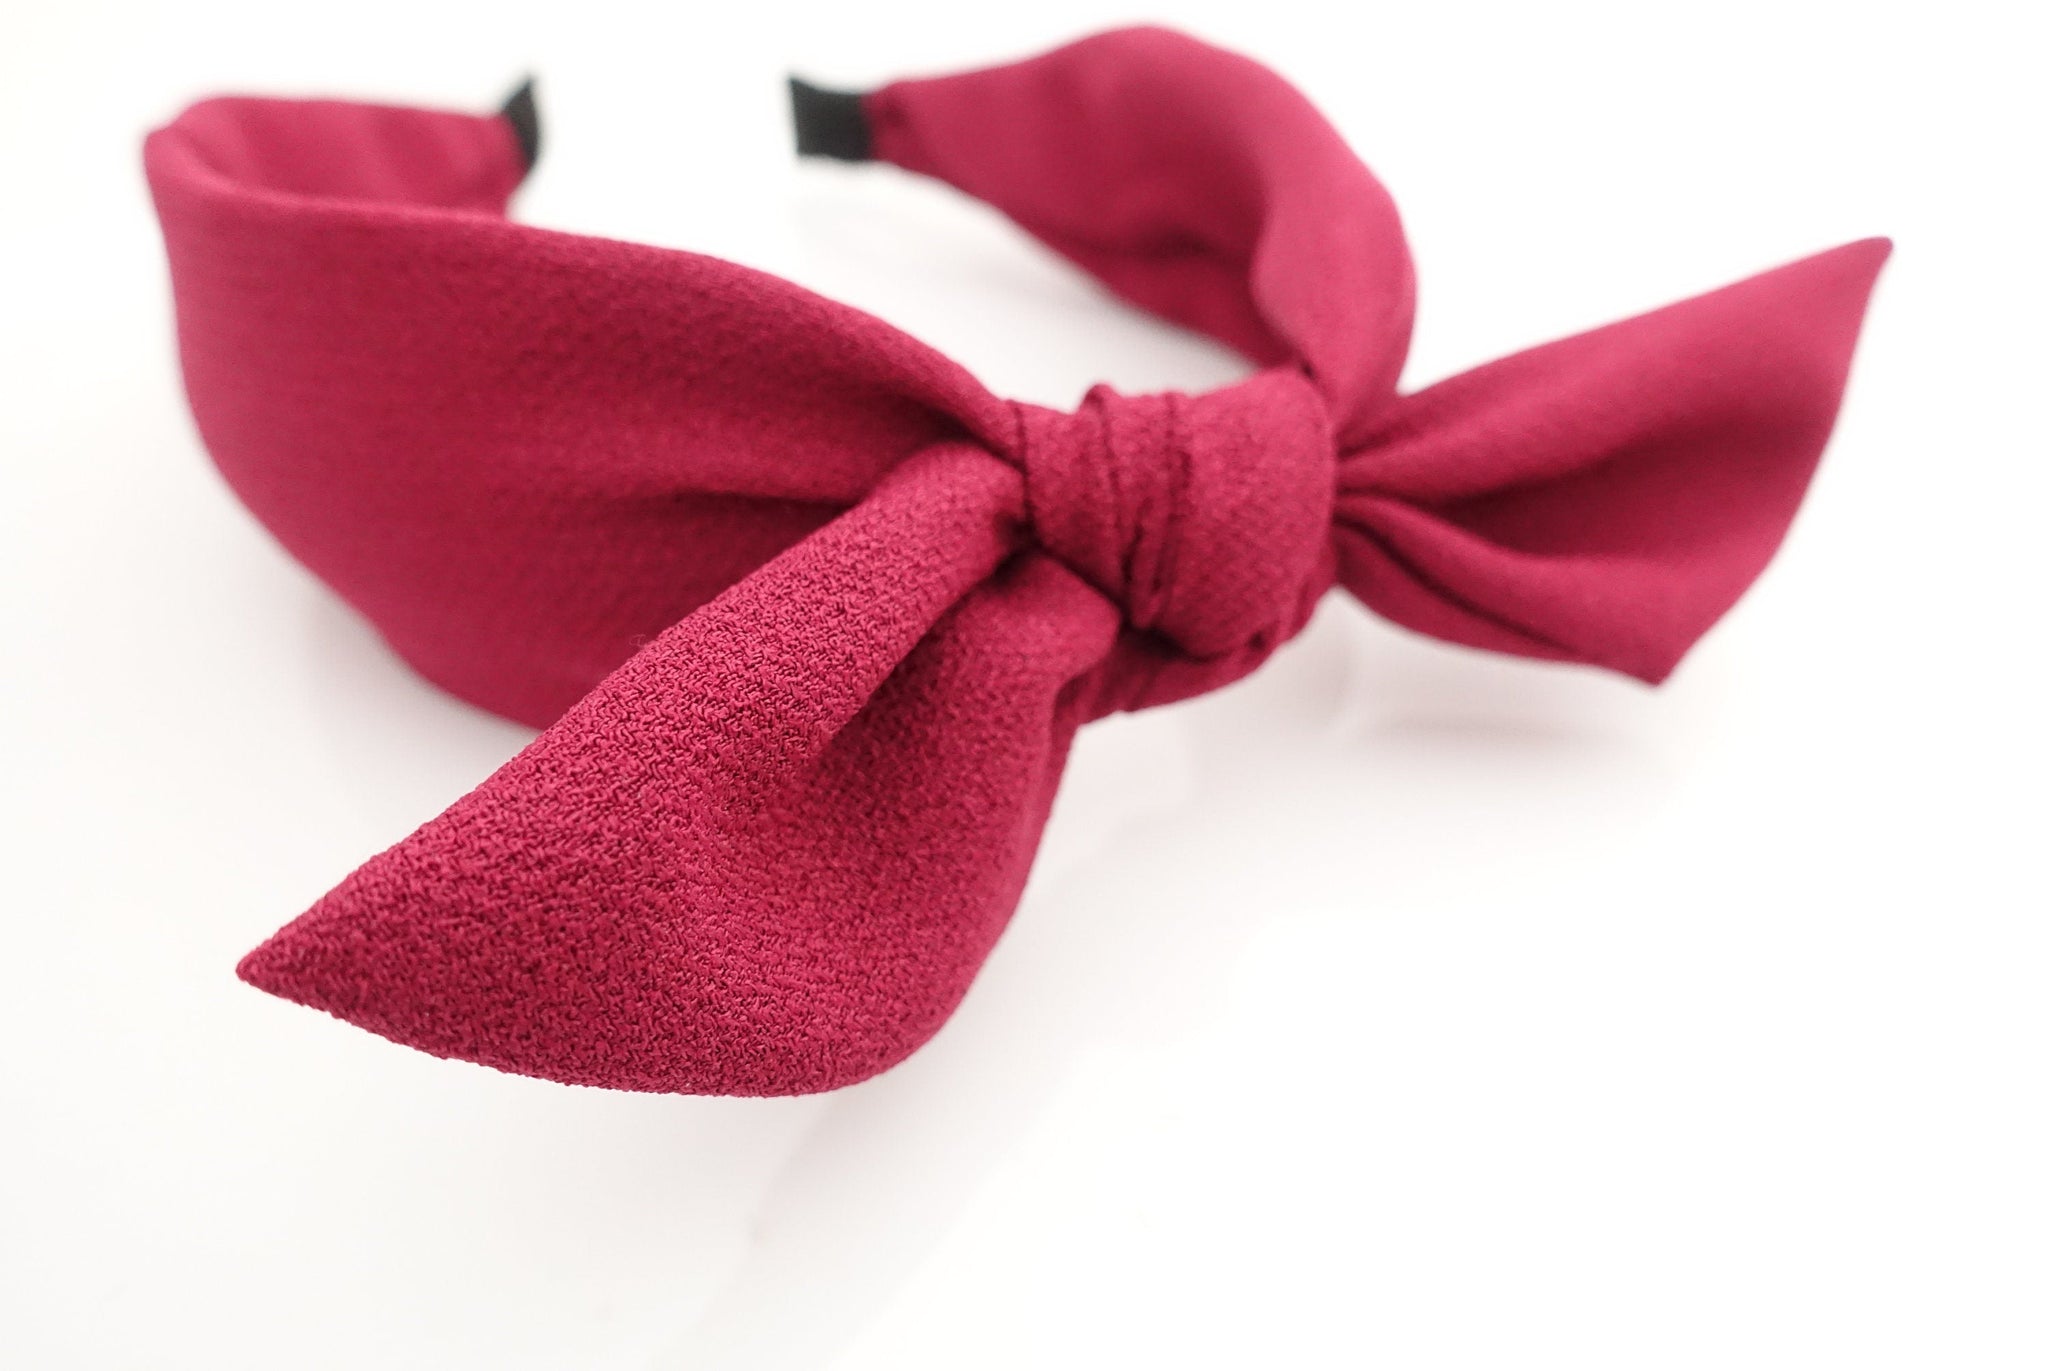 veryshine.com Headband Red wine wired hair bow solid color headband casual adjustable bow hairband woman hair accessory